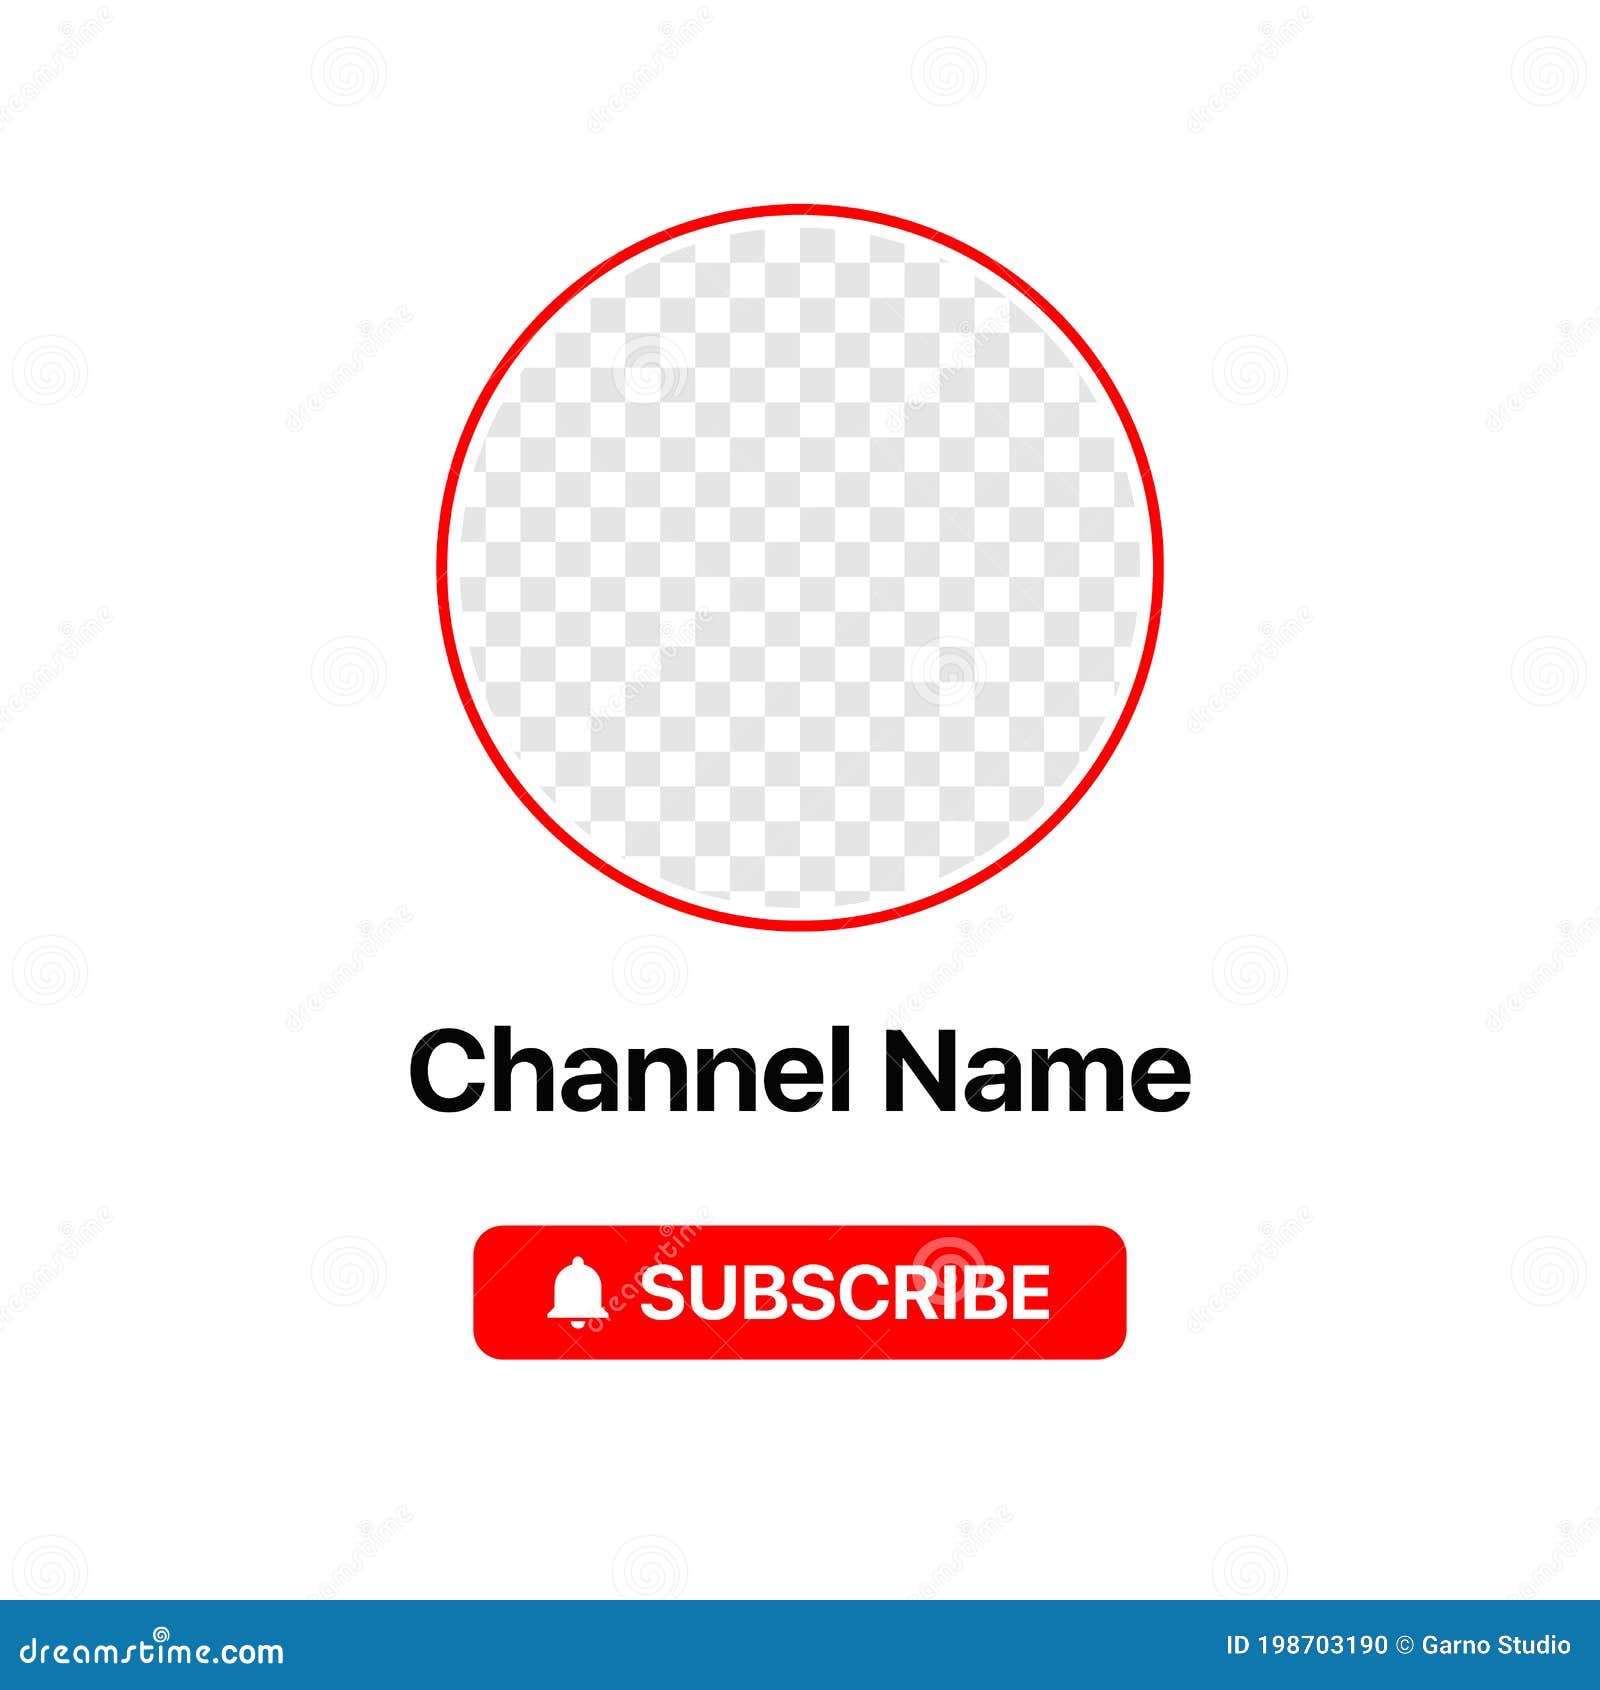 youtube profile icon interface. subscribe button. channel name. transparent placeholder. put your photo under background